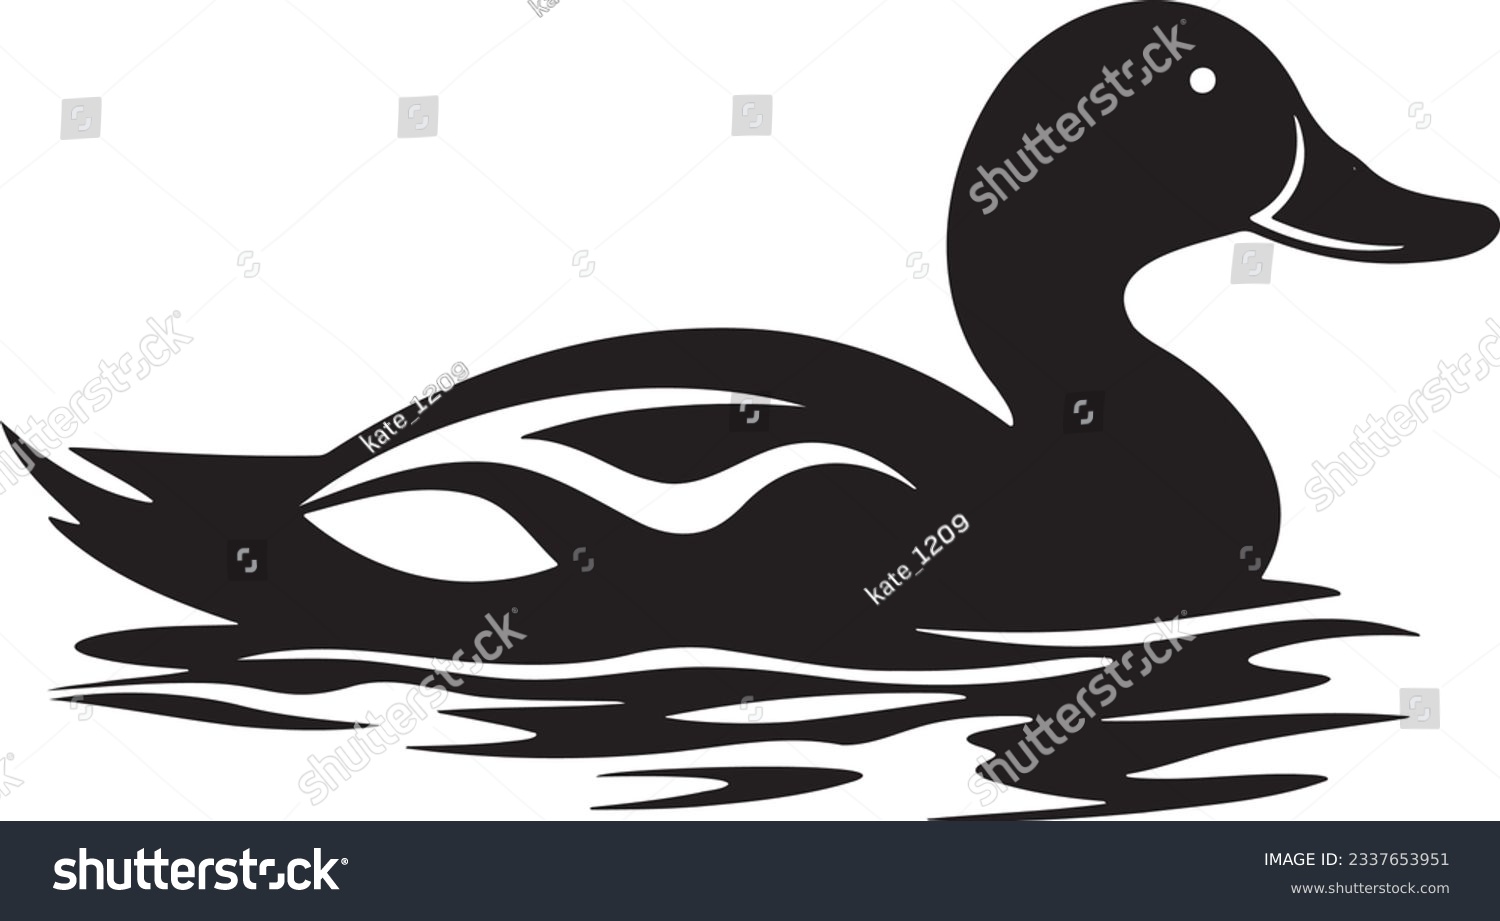 SVG of Duck swimming on a pond, Basic simple Minimalist vector SVG graphic, isolated on white background, black and white svg